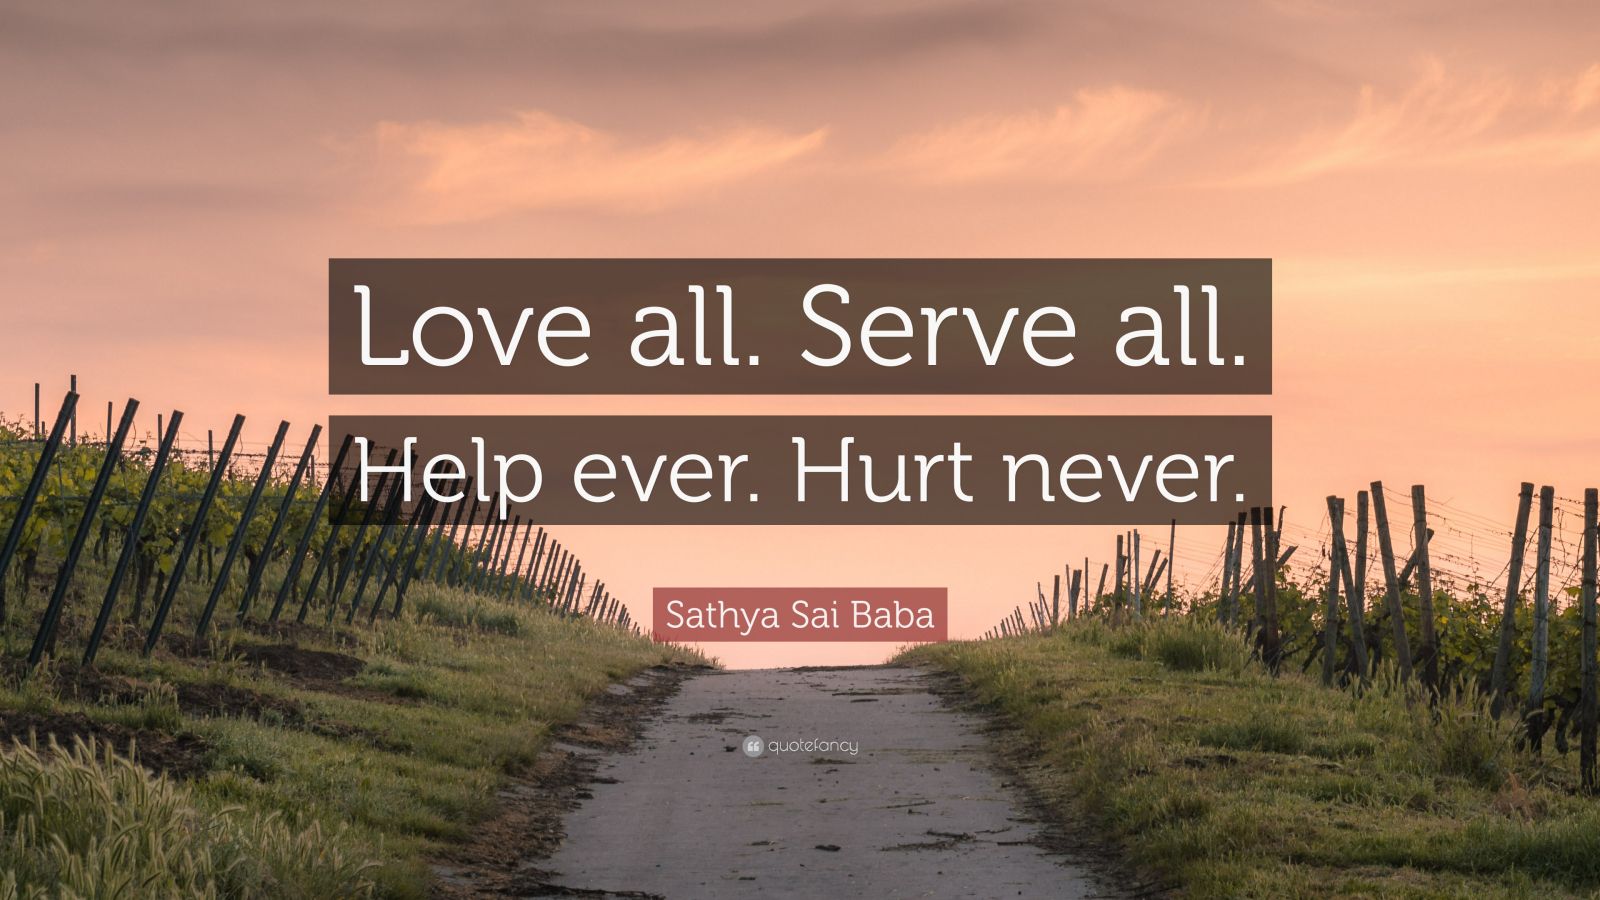 essay on love all serve all